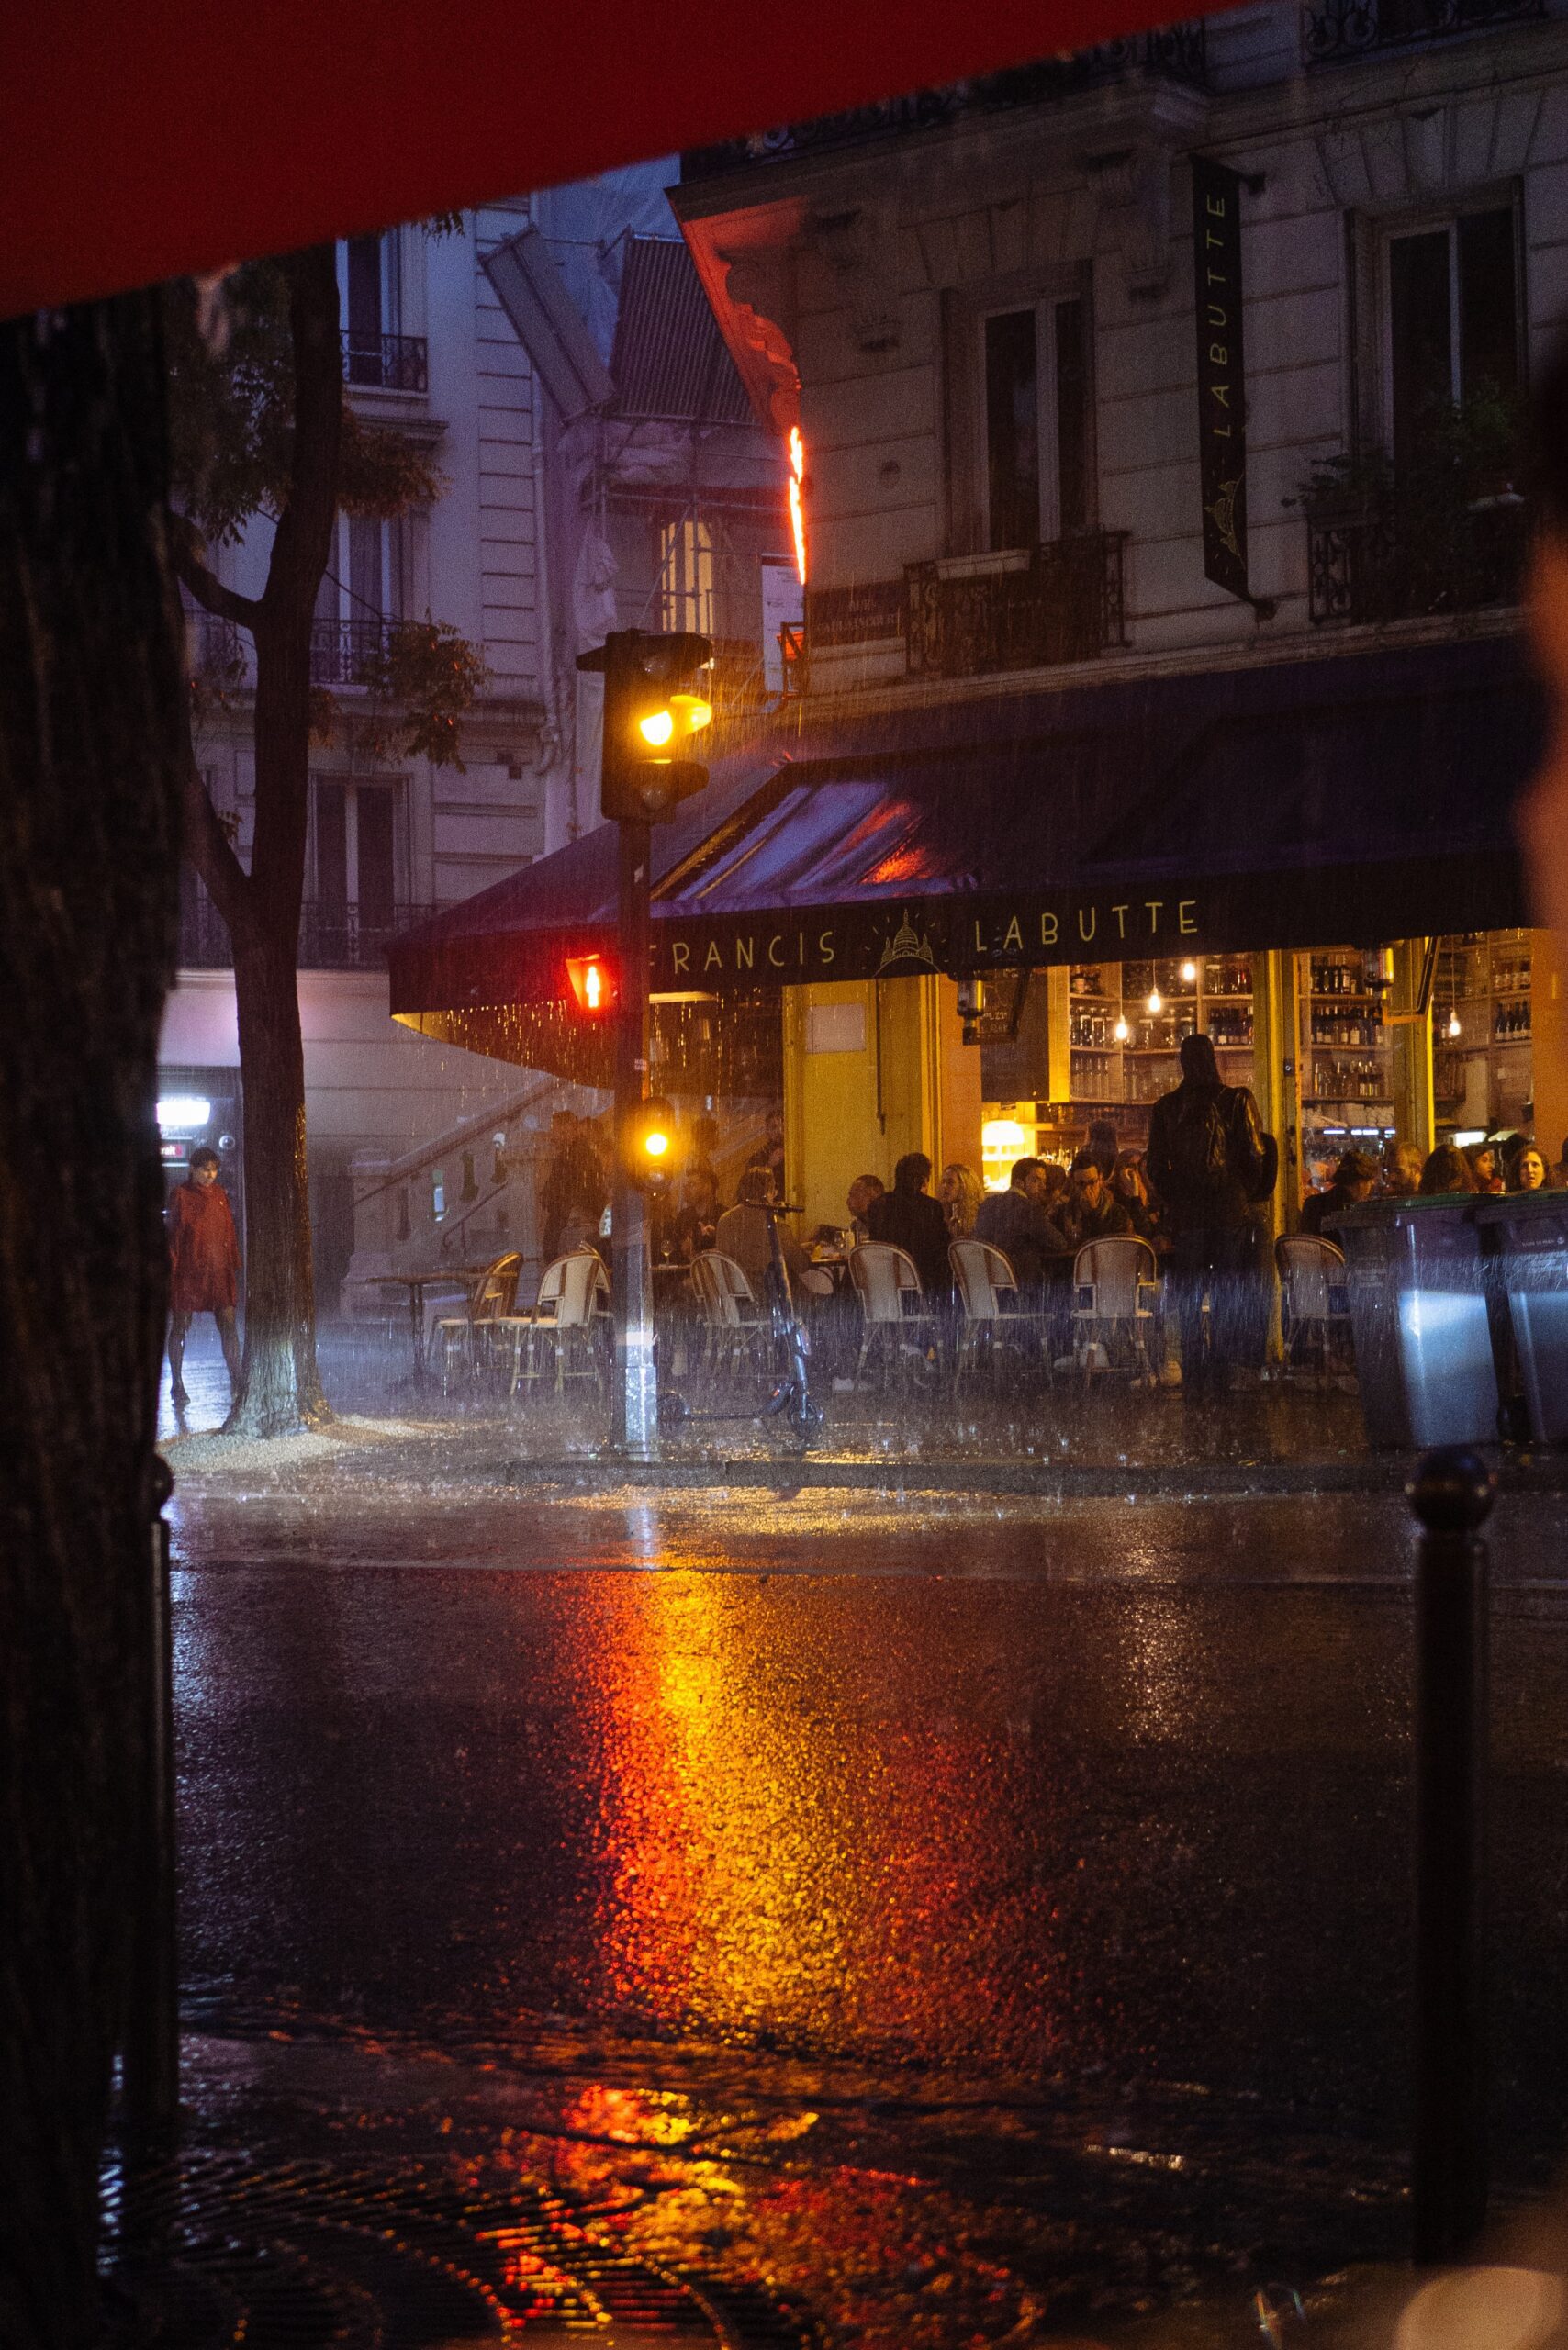 matthee-A rainy night in Paris, while sitting dry under a heater. Beautiful reflections on a soaked street gave a very special vibe while eating dinner.-unsplash. Montmartre, Paris, France Published on June 3, 2019